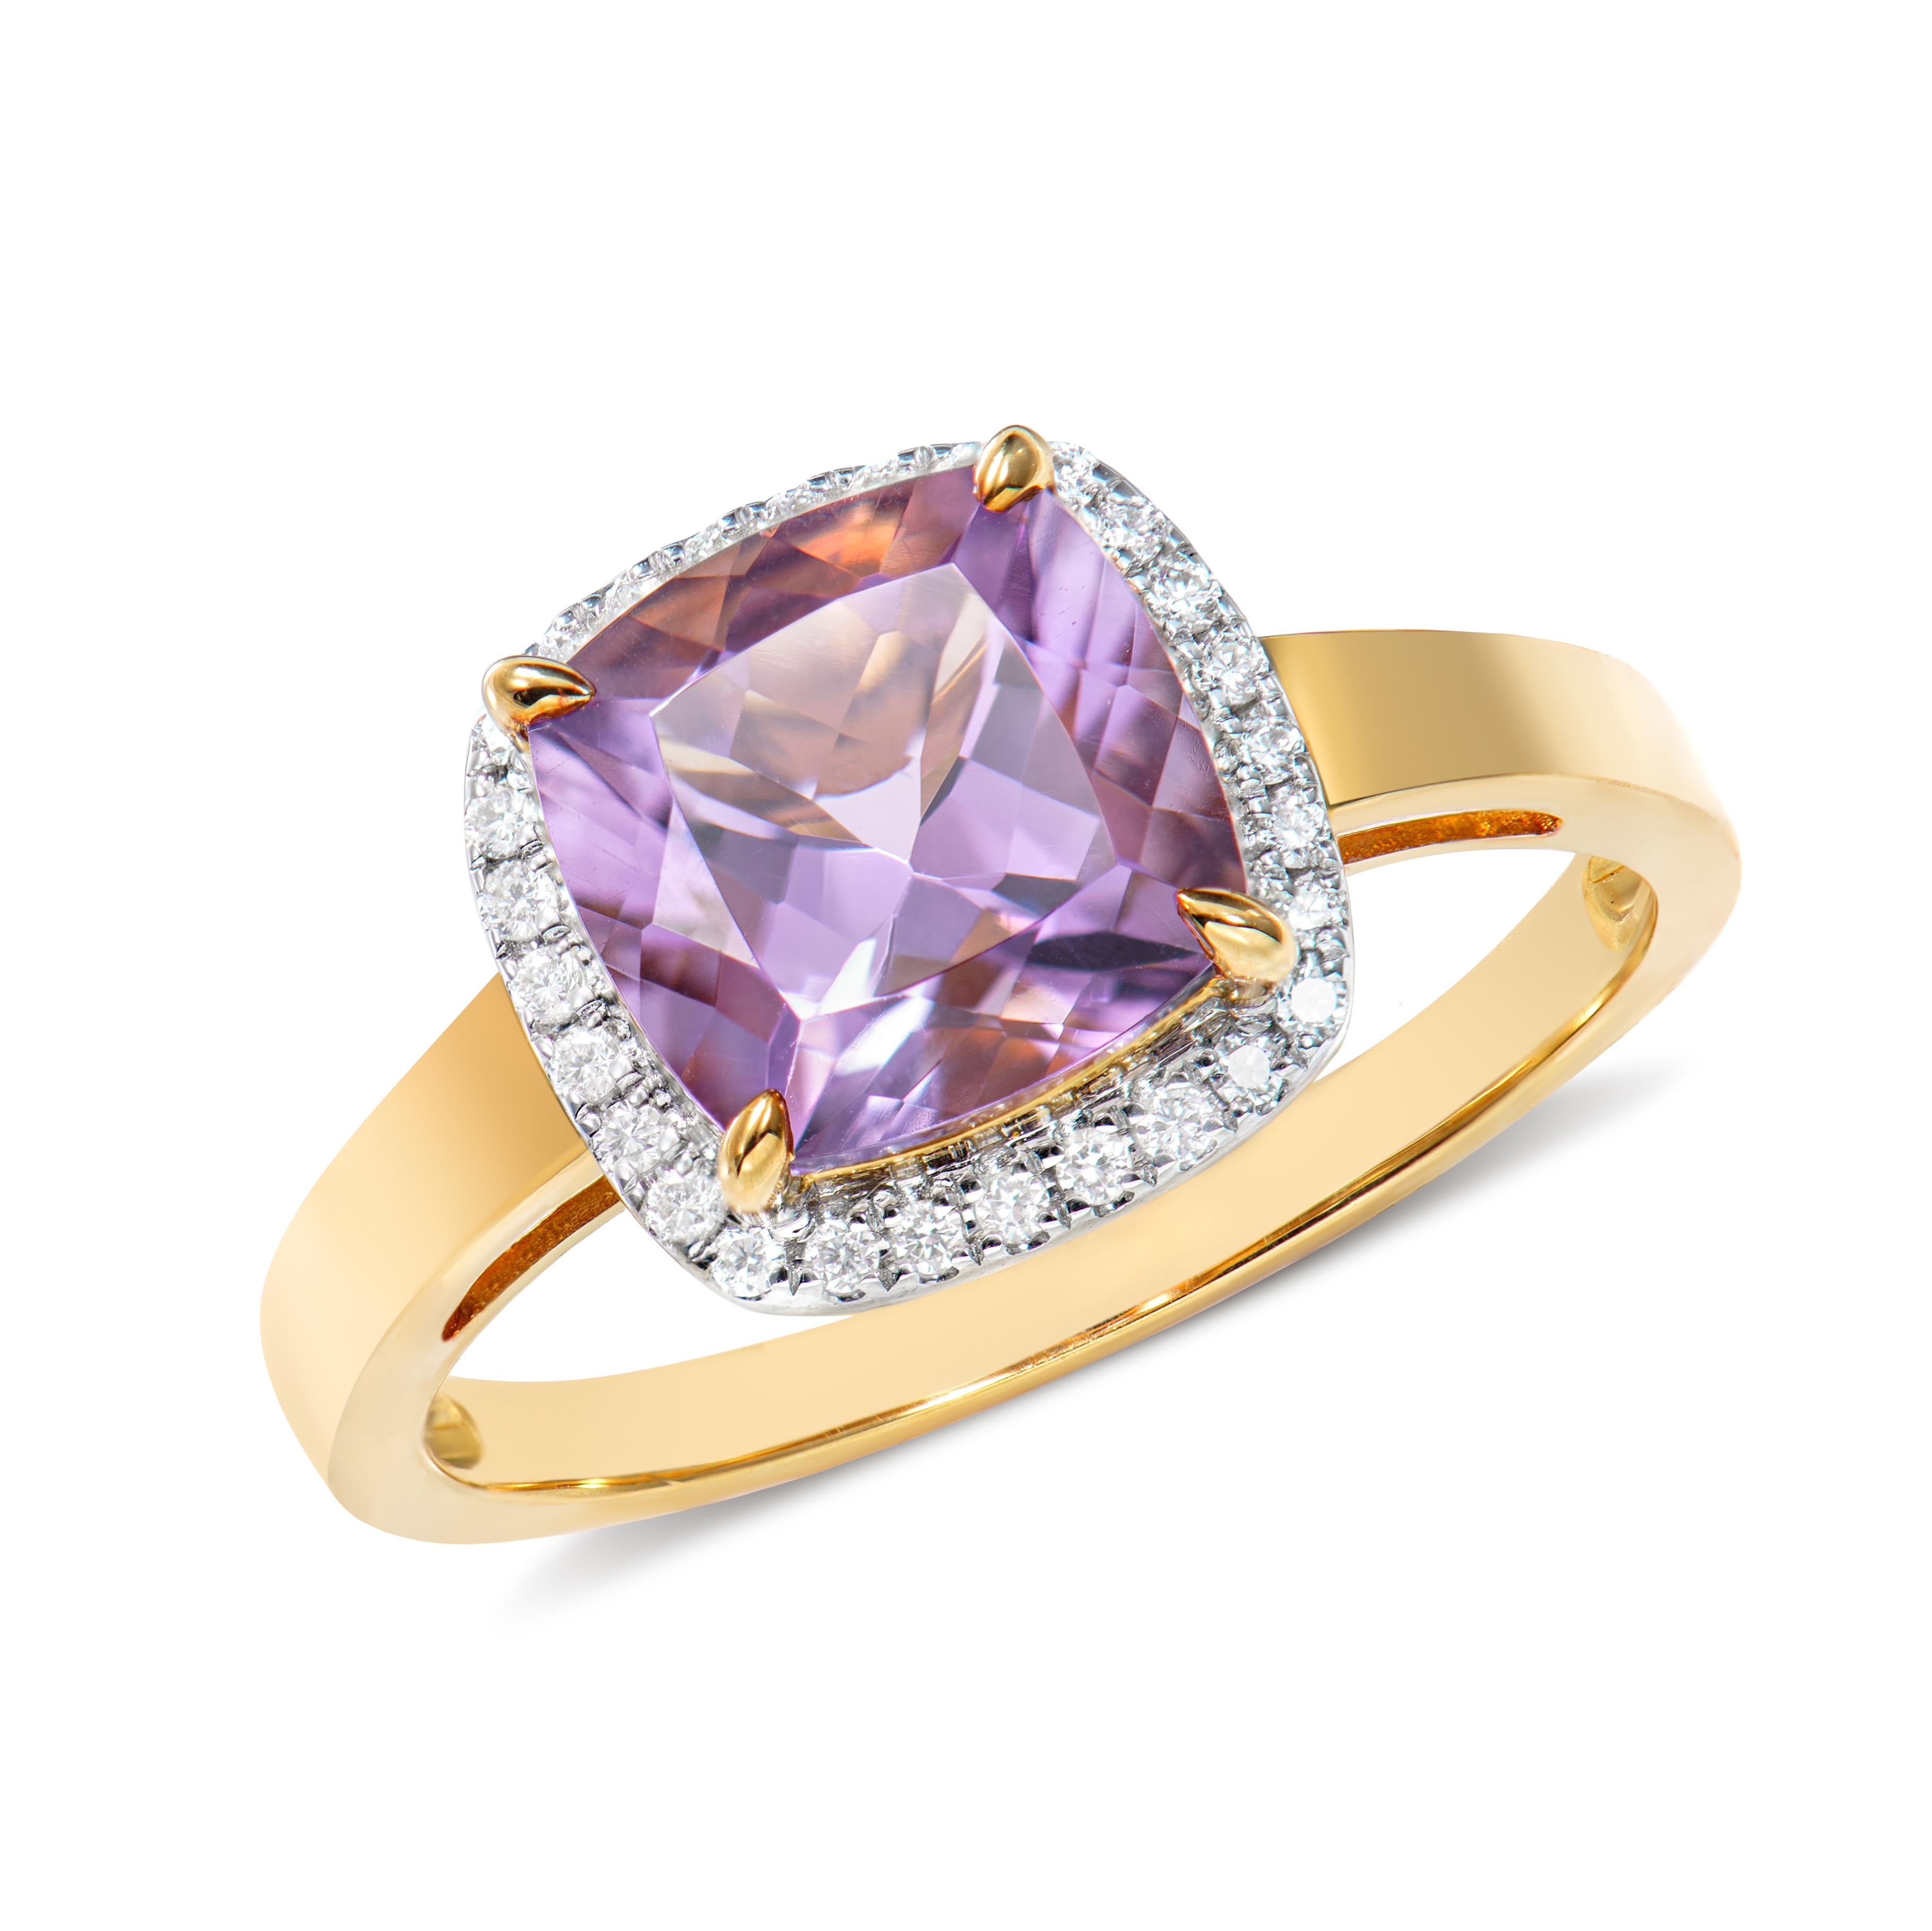 Presented A lovely collection of gems, including Amethyst, Peridot, Rhodolite, Sky Blue Topaz, Swiss Blue Topaz and Morganite is perfect for people who value quality and want to wear it to any occasion or celebration. The yellow gold Amethyst Ring